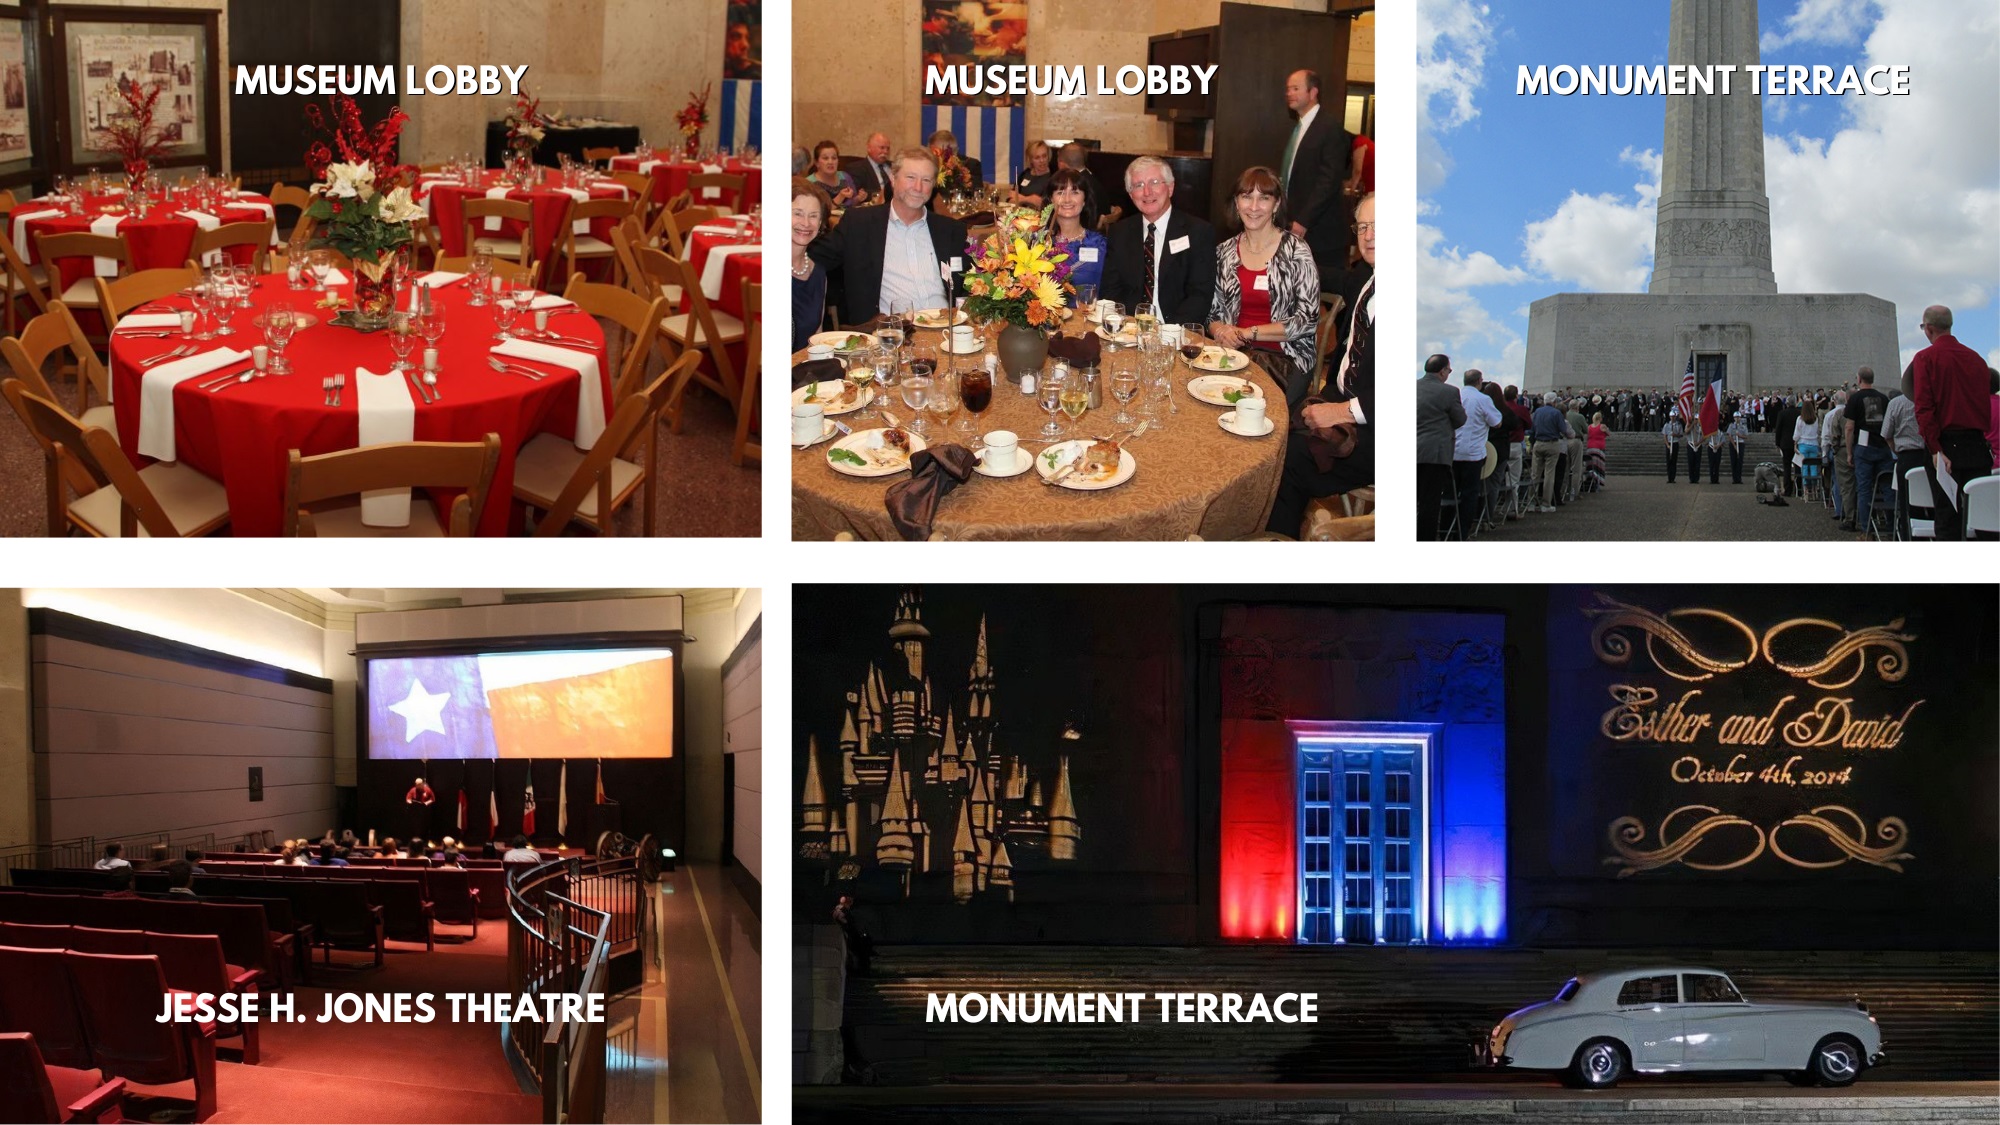 A collage photo of the San Jacinto Battleground and Museum's lobby, monument terrace, and theater